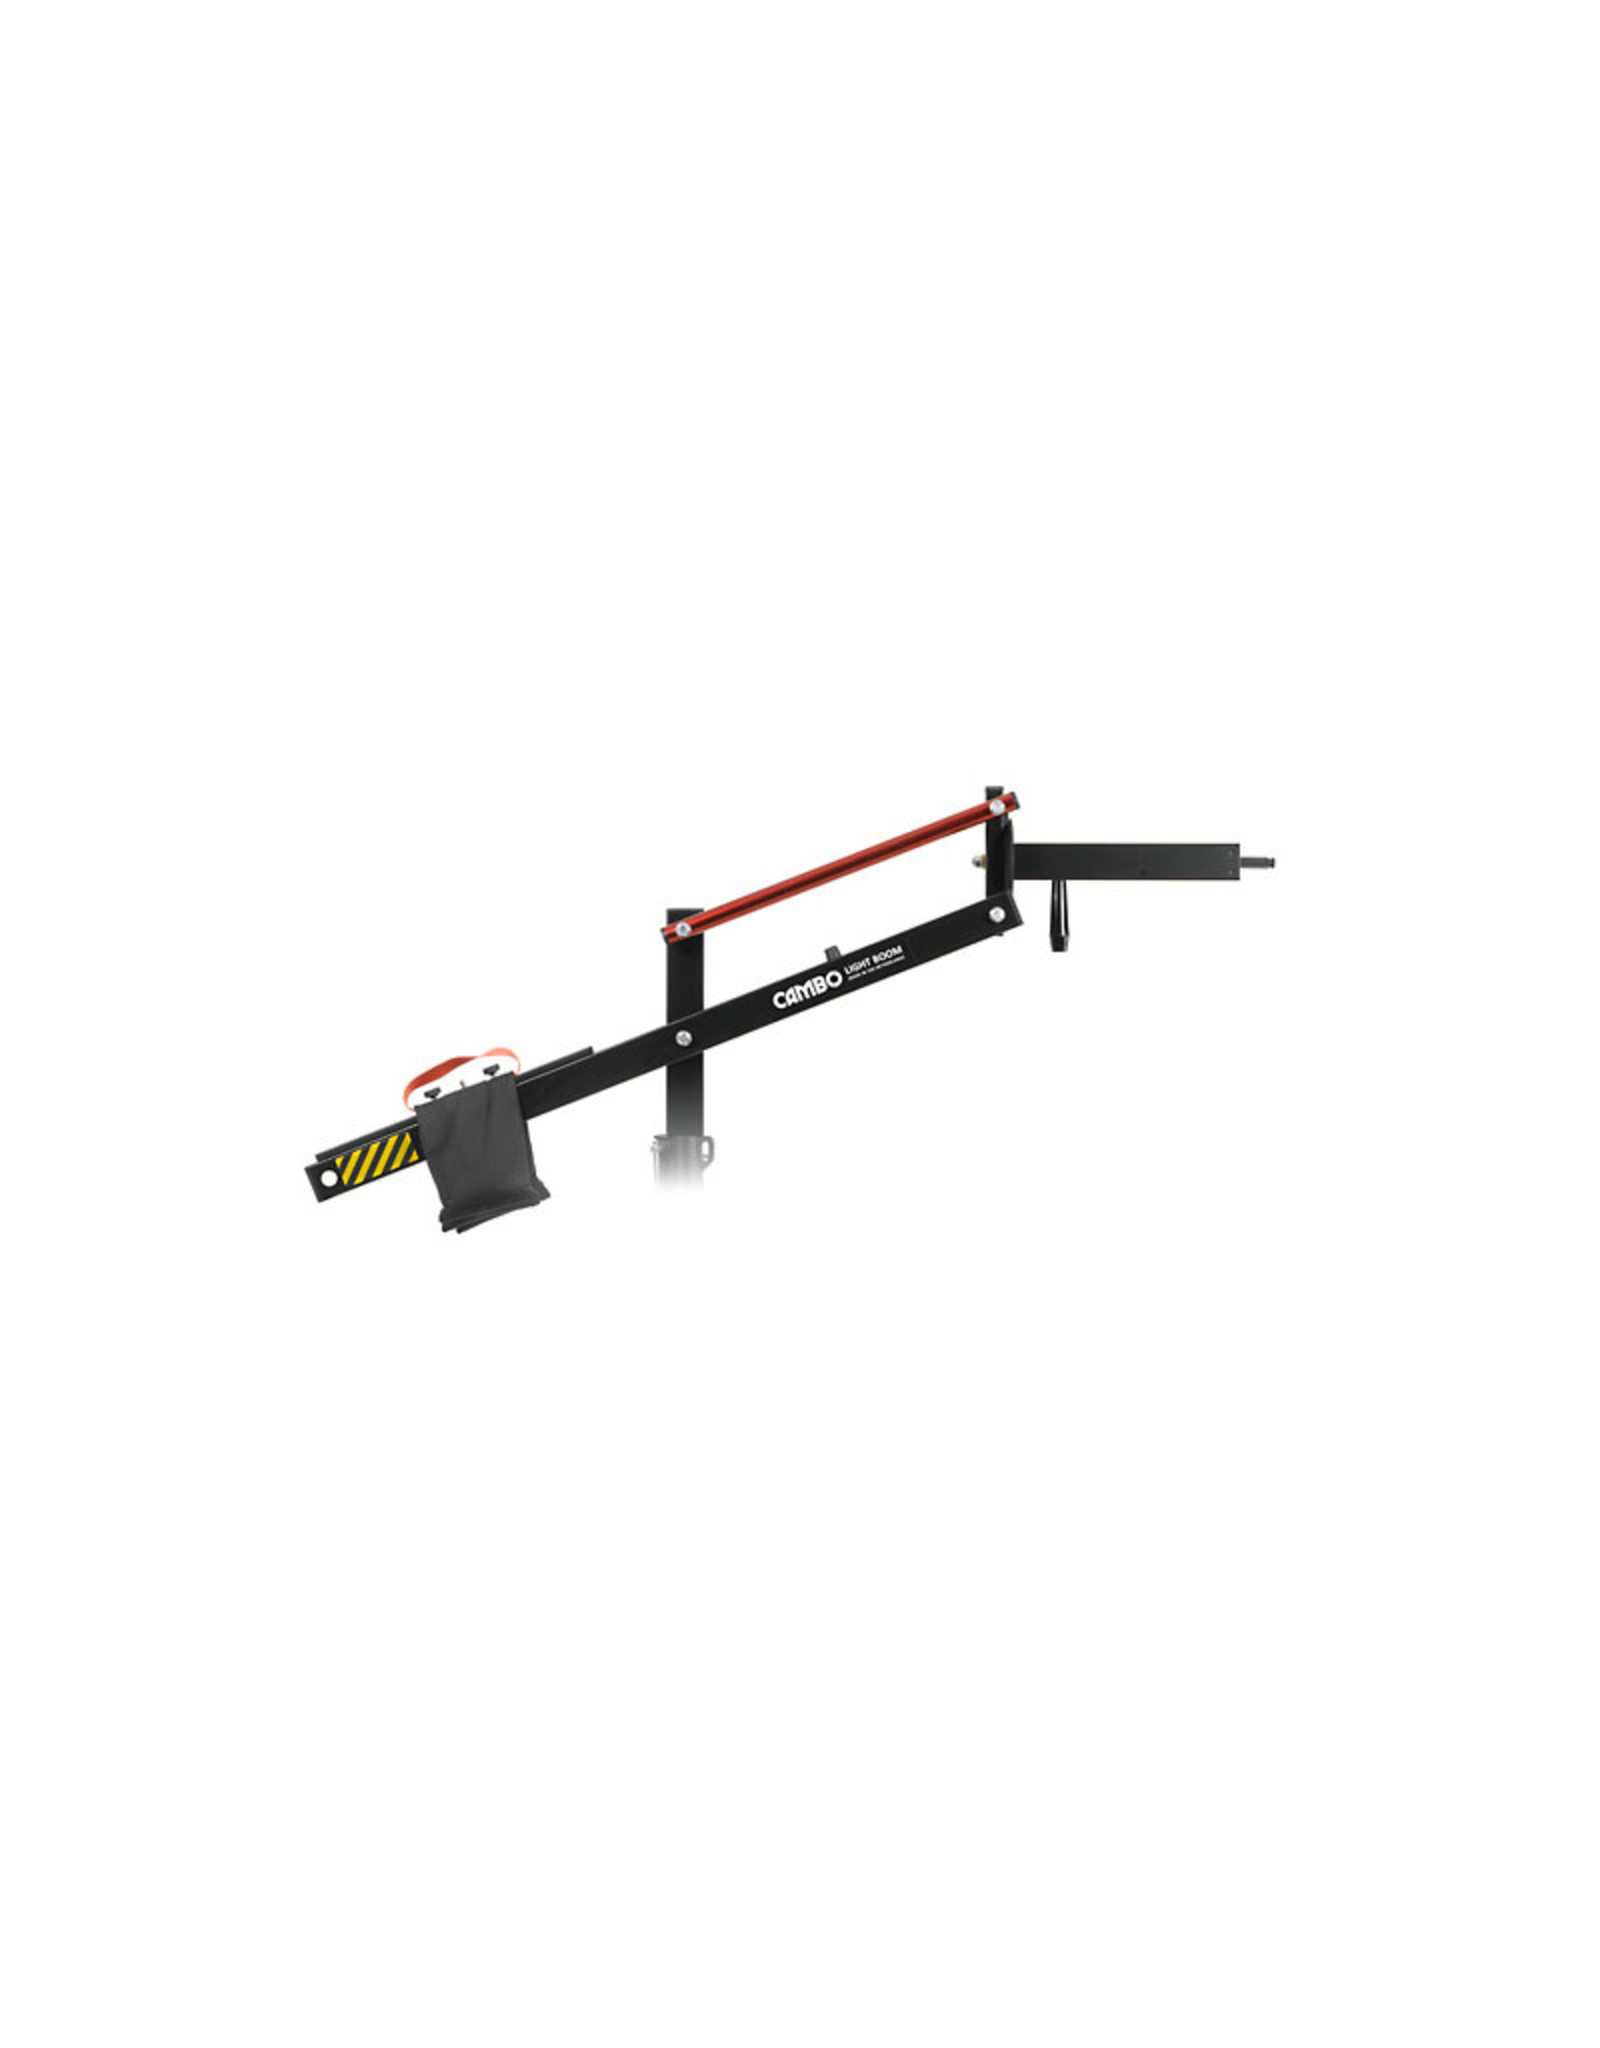 Cambo Cambo RD-1100 Redwing Compact Light Boom with empty bags [No lead]